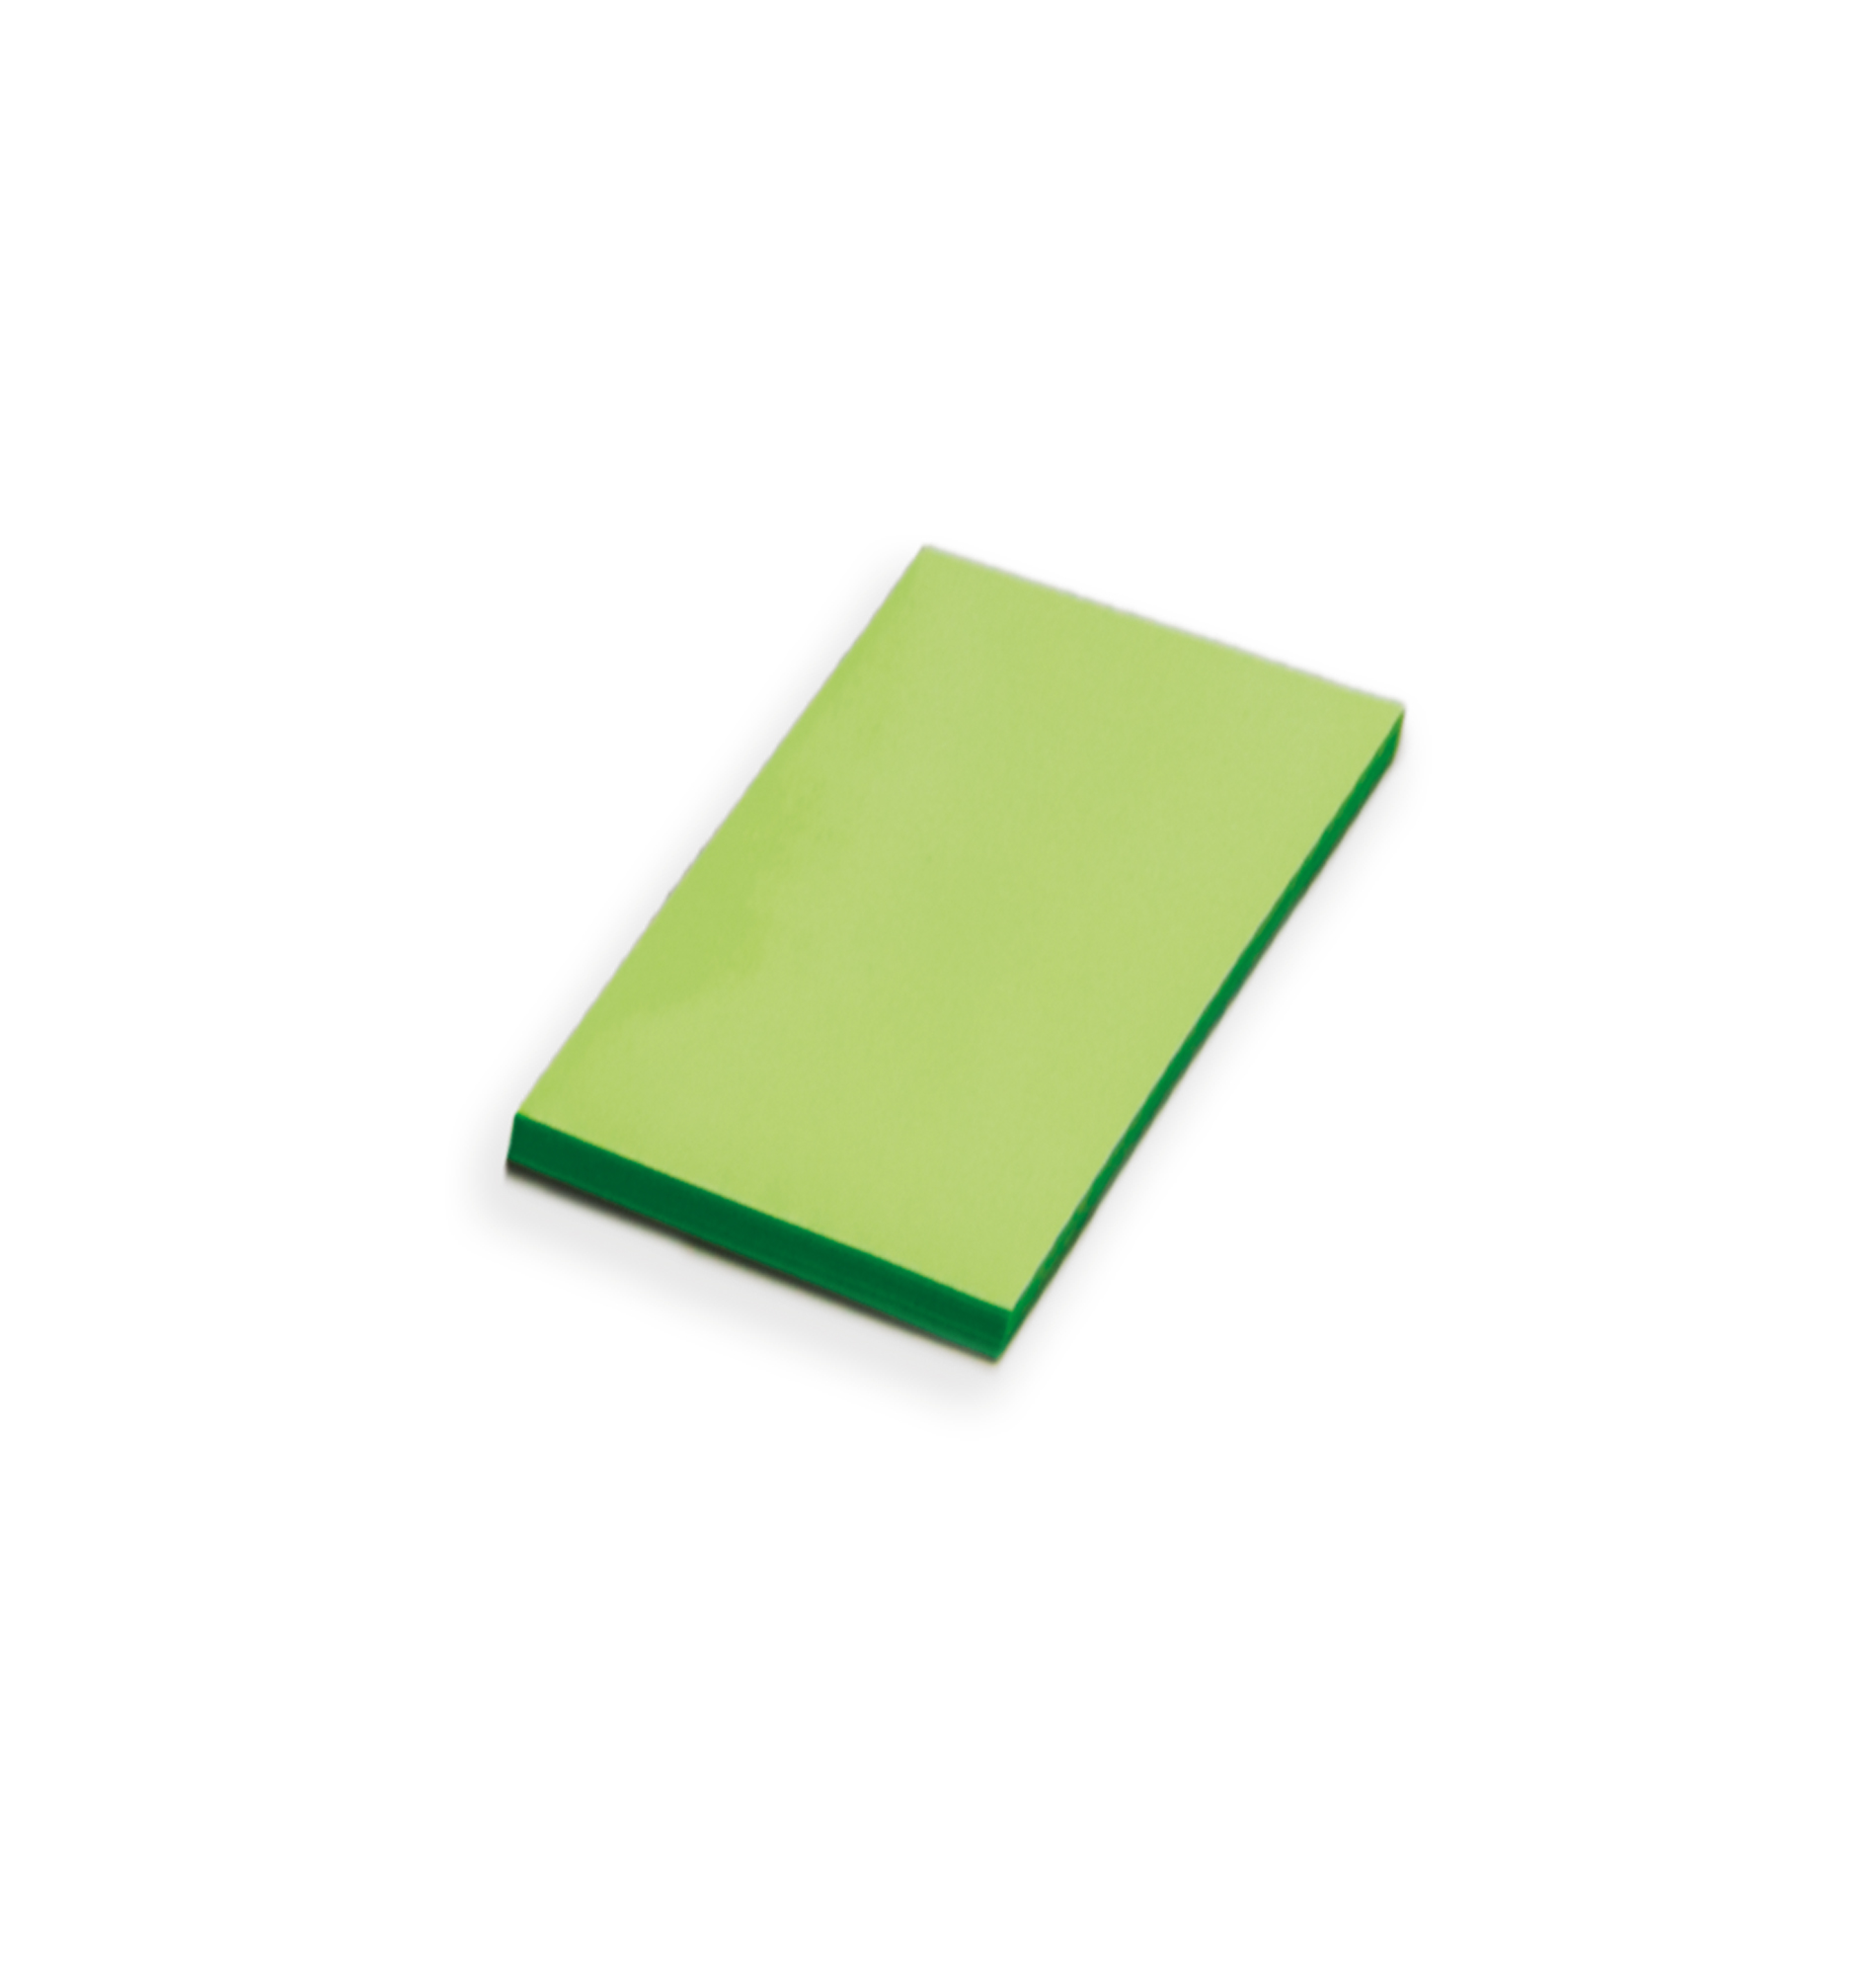 TaktiNotes 8x14cm packaging unit 100 green